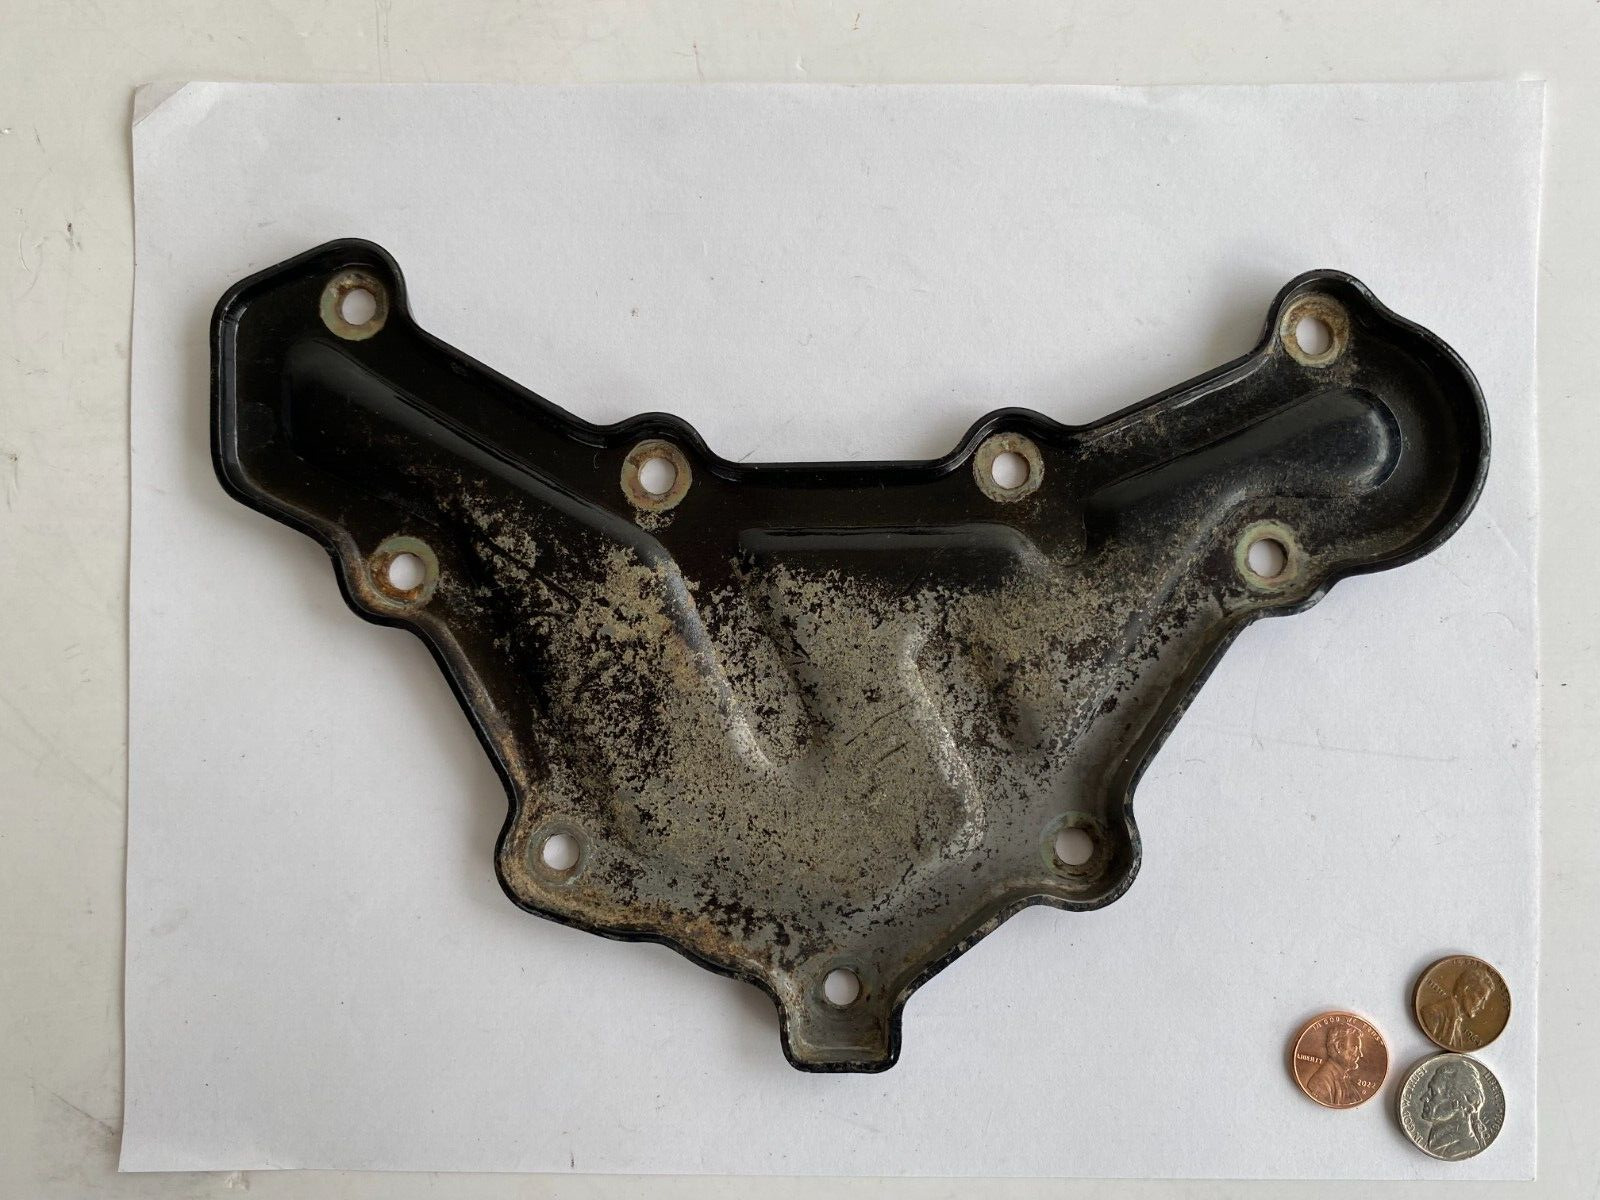 75-80 TOYOTA 20R Intake Manifold WATER BLOCK OFF PLATE HILUX PICKUP TRUCK CELICA